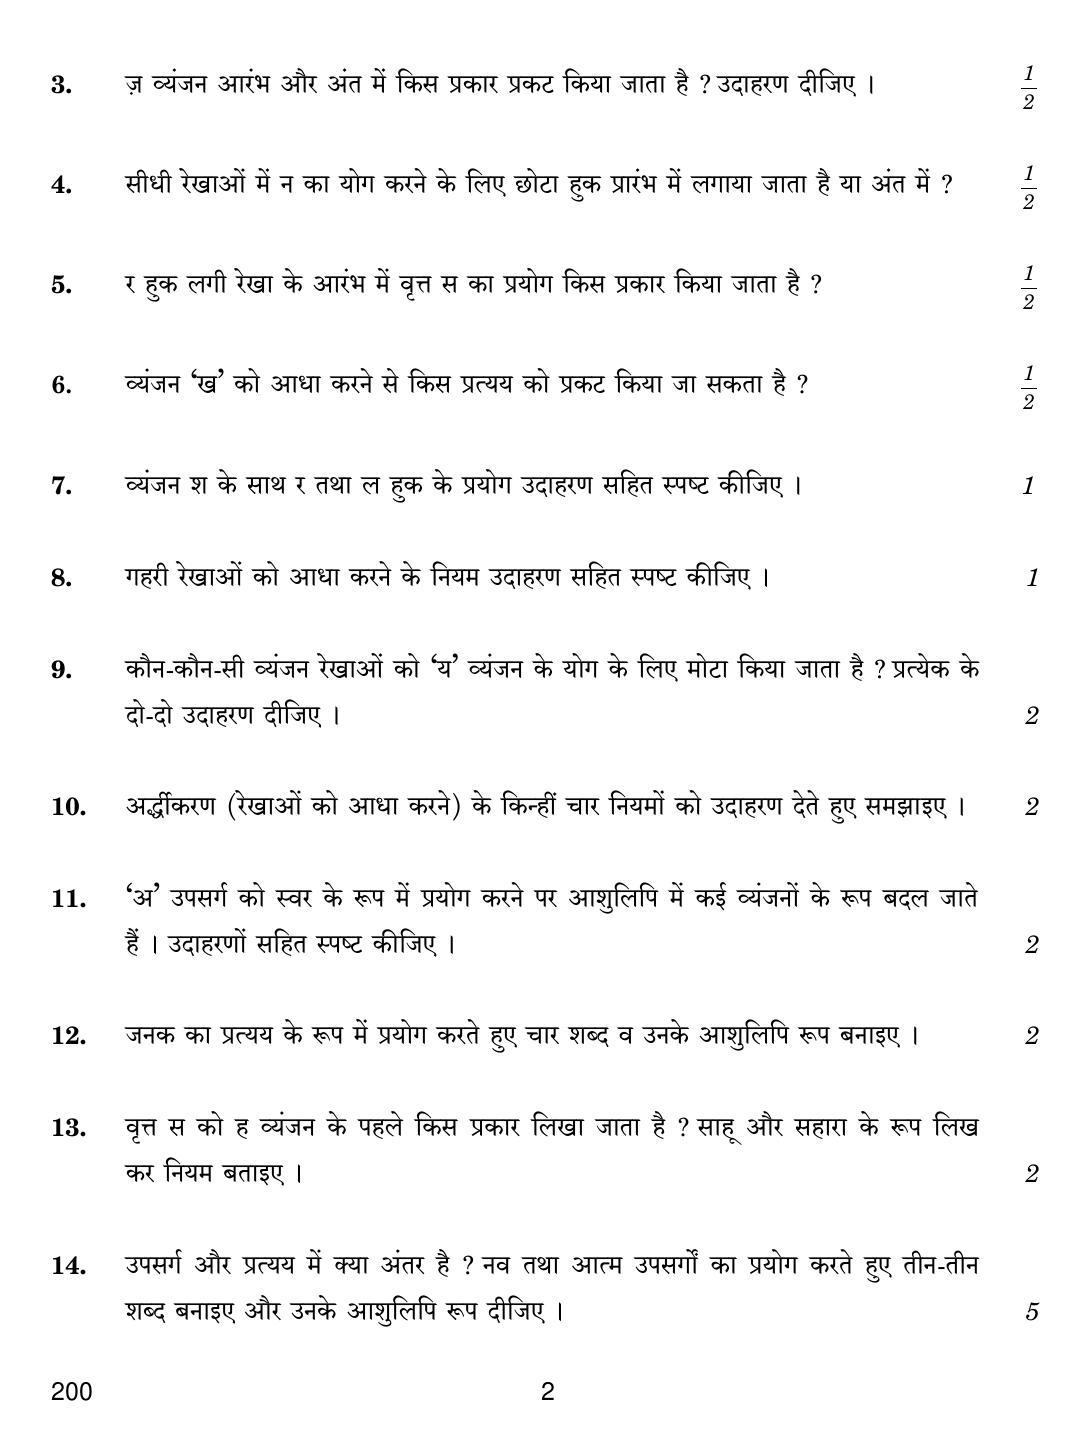 CBSE Class 12 200 SHORTHAND HINDI 2018 Question Paper - Page 2